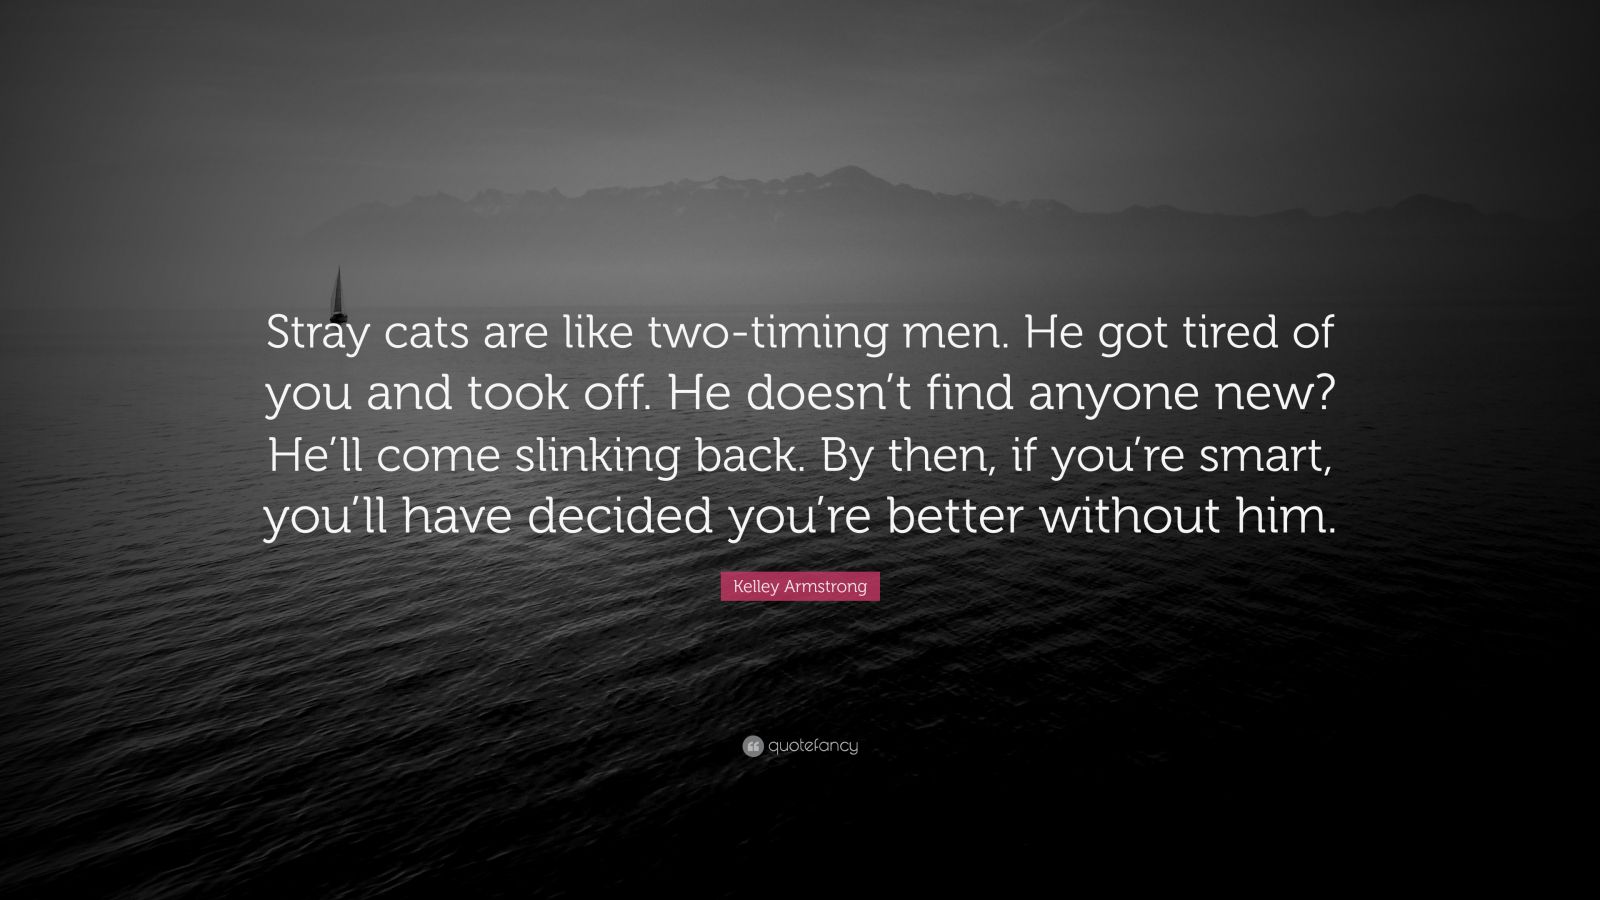 Kelley Armstrong Quote: “Stray cats are like two-timing men. He got tired  of you and took off. He doesn't find anyone new? He'll come slinking ba”